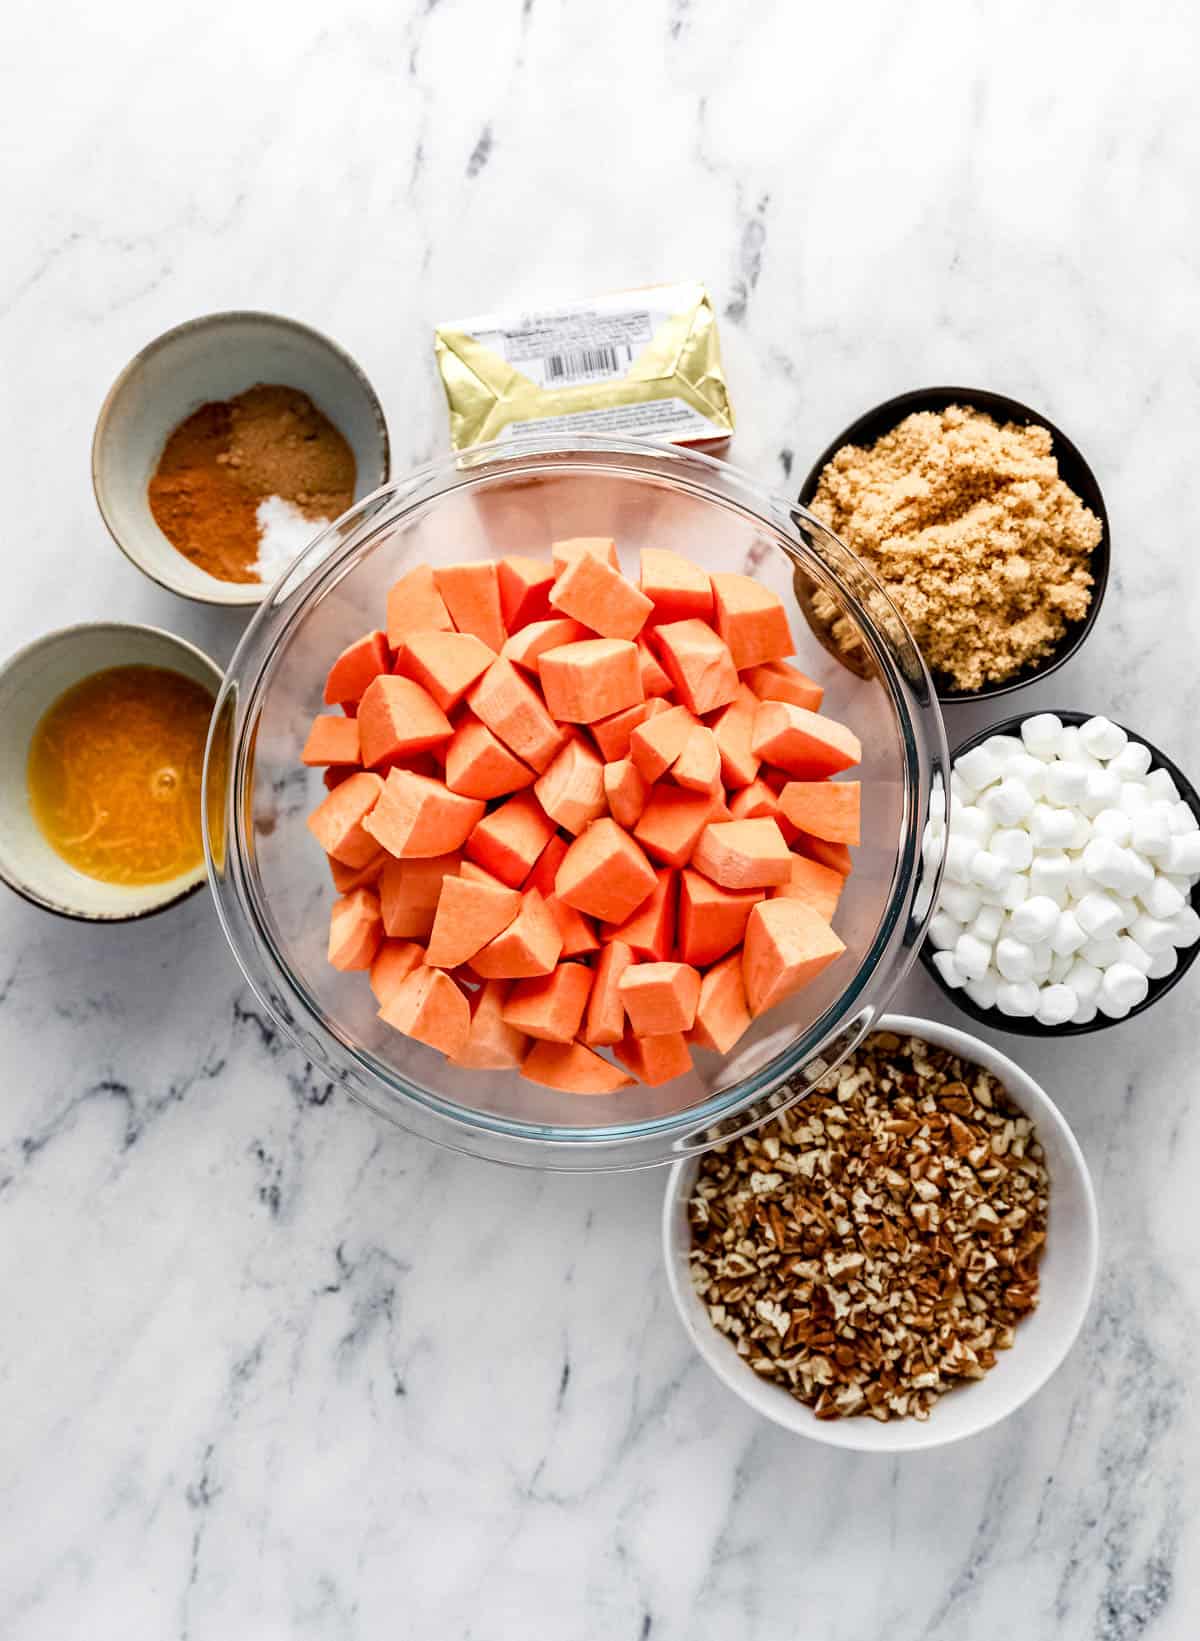 Ingredients needed to make sweet potato casserole in separate bowls on marble surface. 